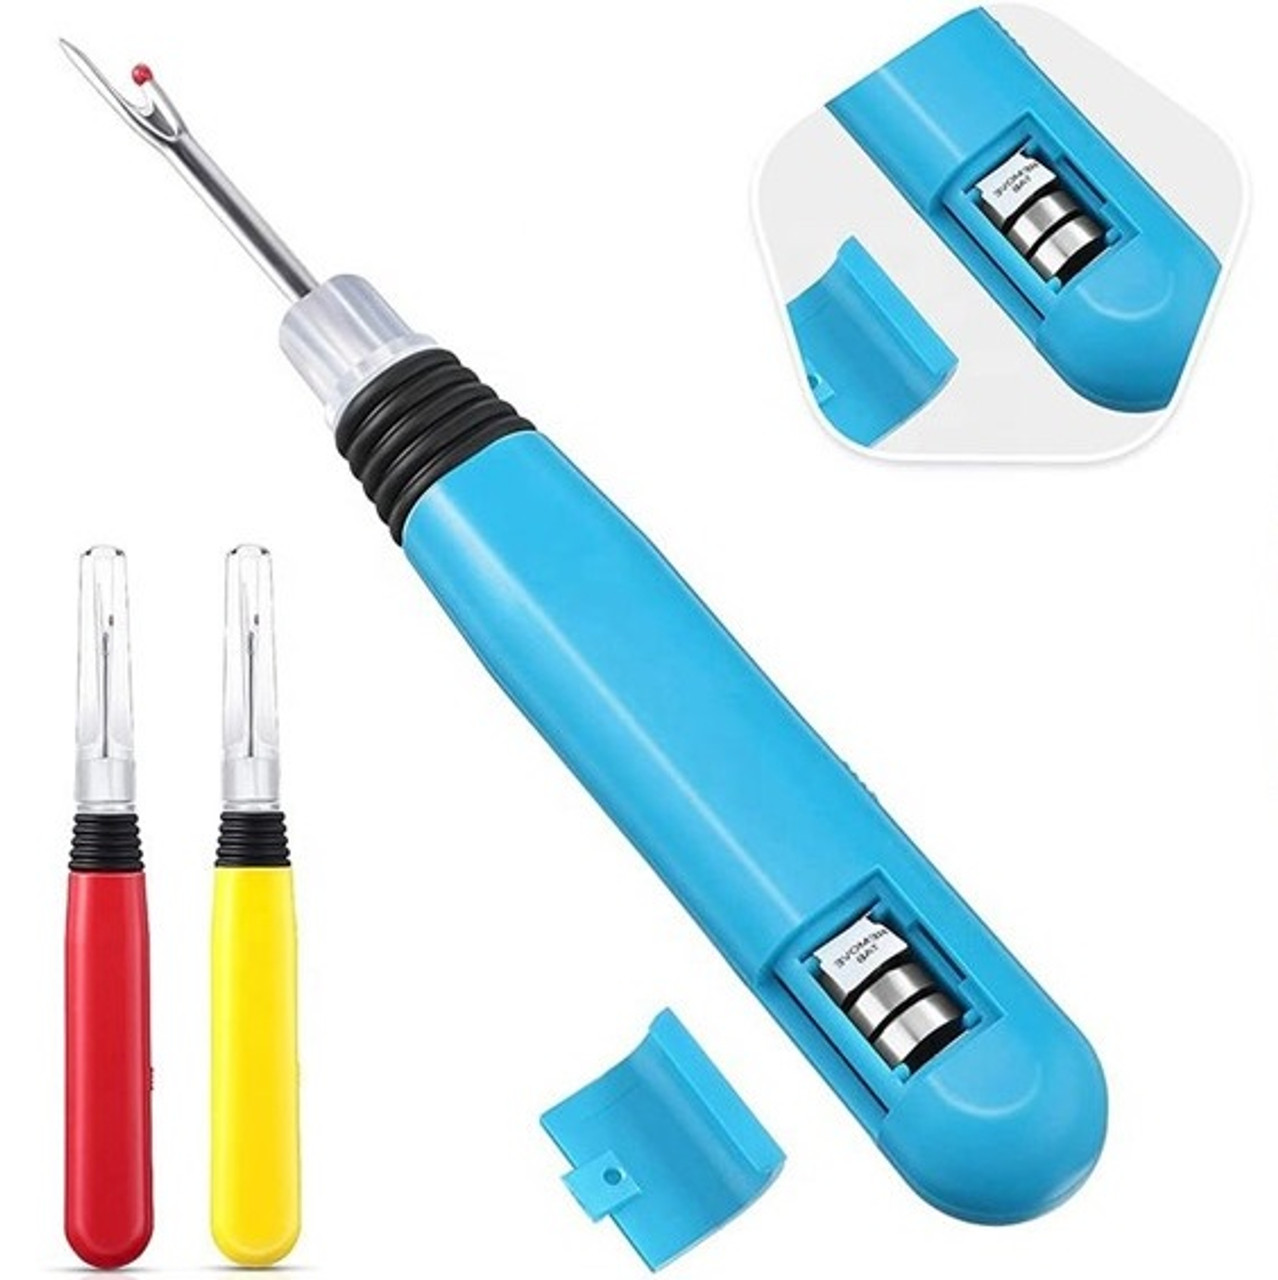 LIghted Seam Ripper- shipping included!